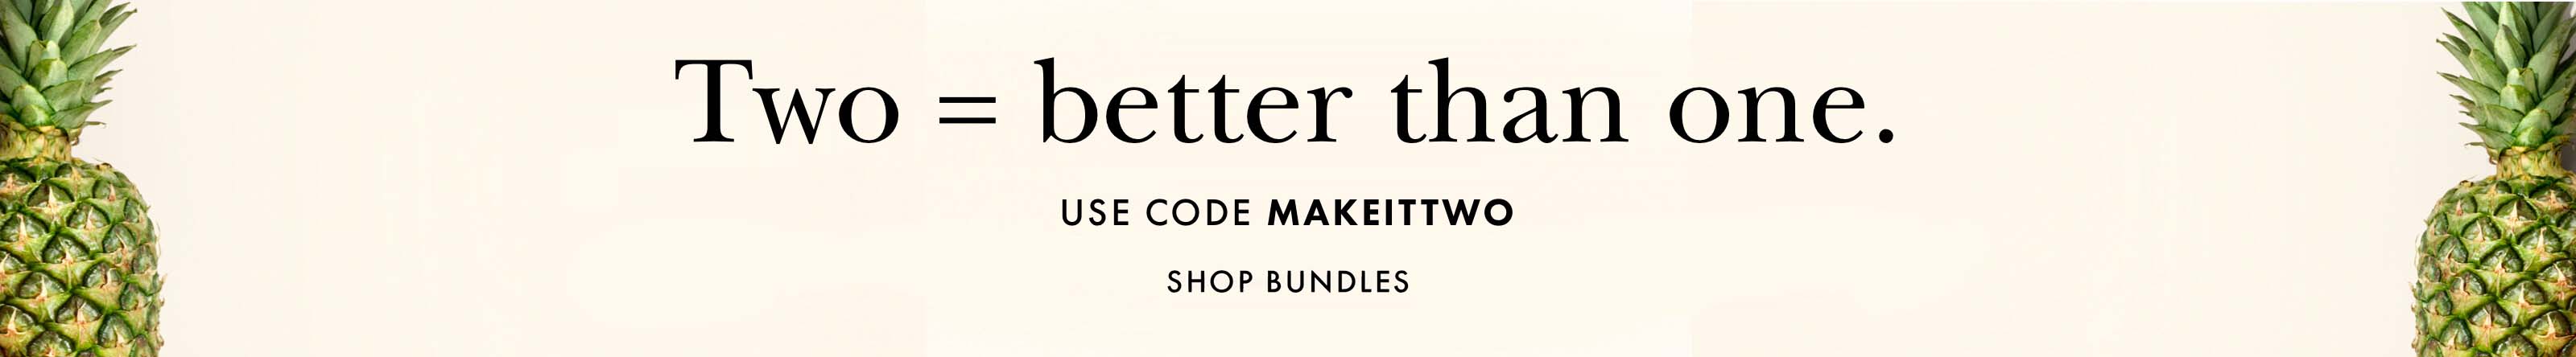 two = better than one. use code makeittwo